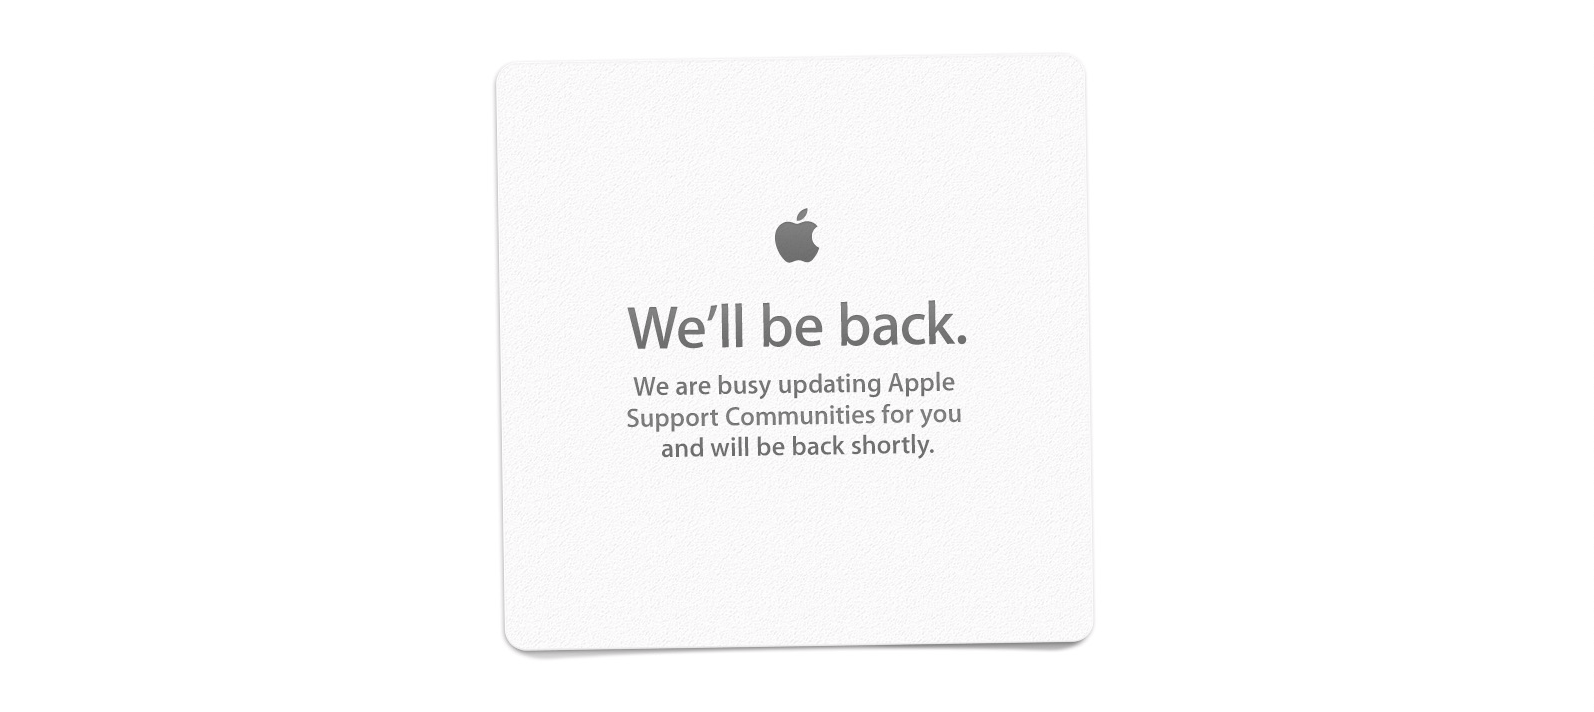 Apple U Logo - Users currently unable to access Apple's Support Communities website